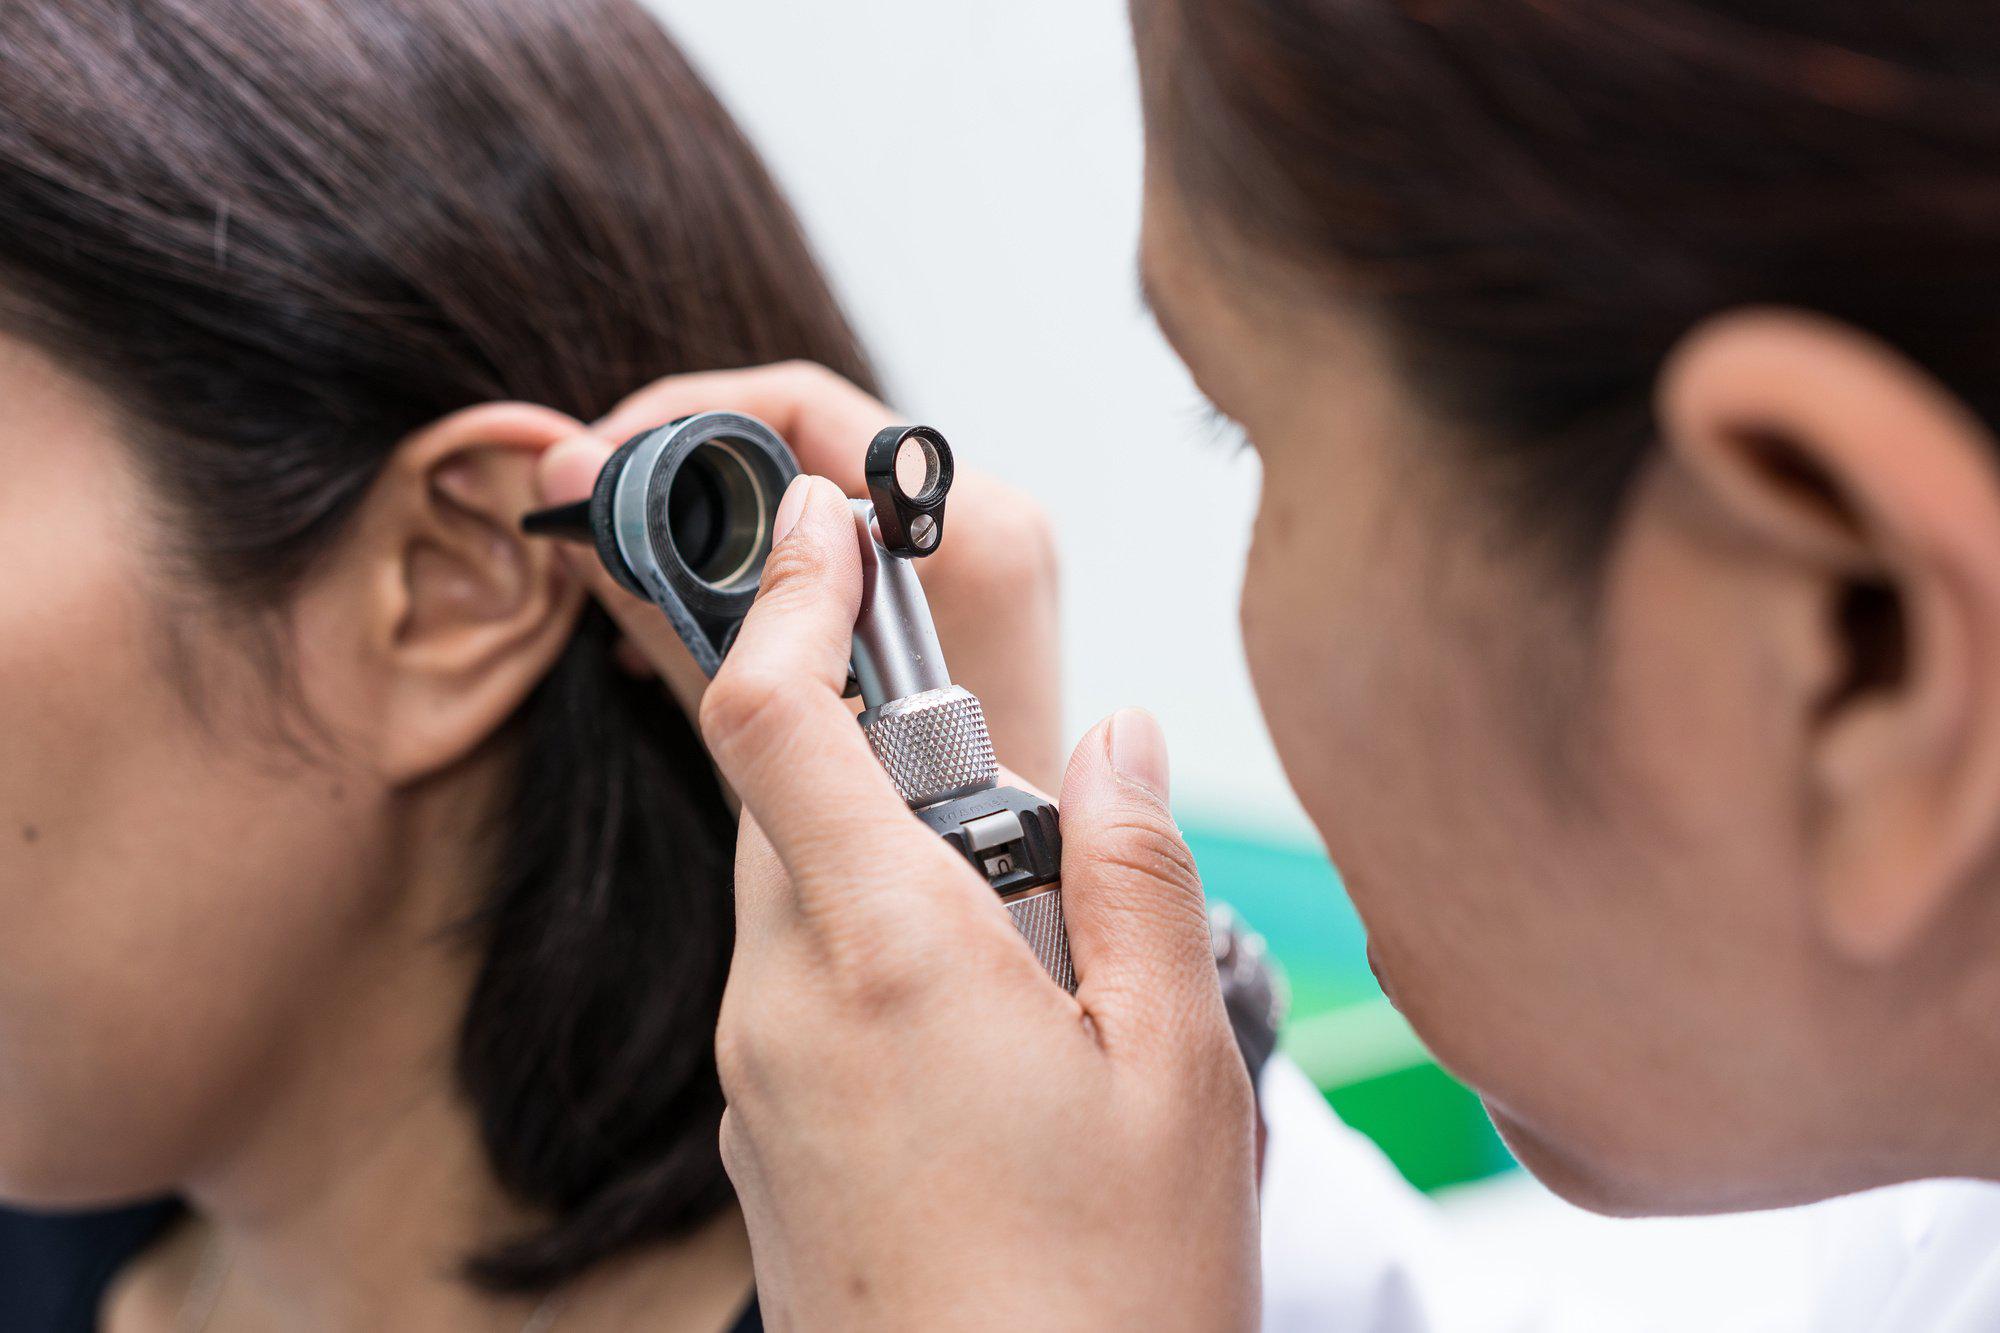 doctor checking the ear of the patient